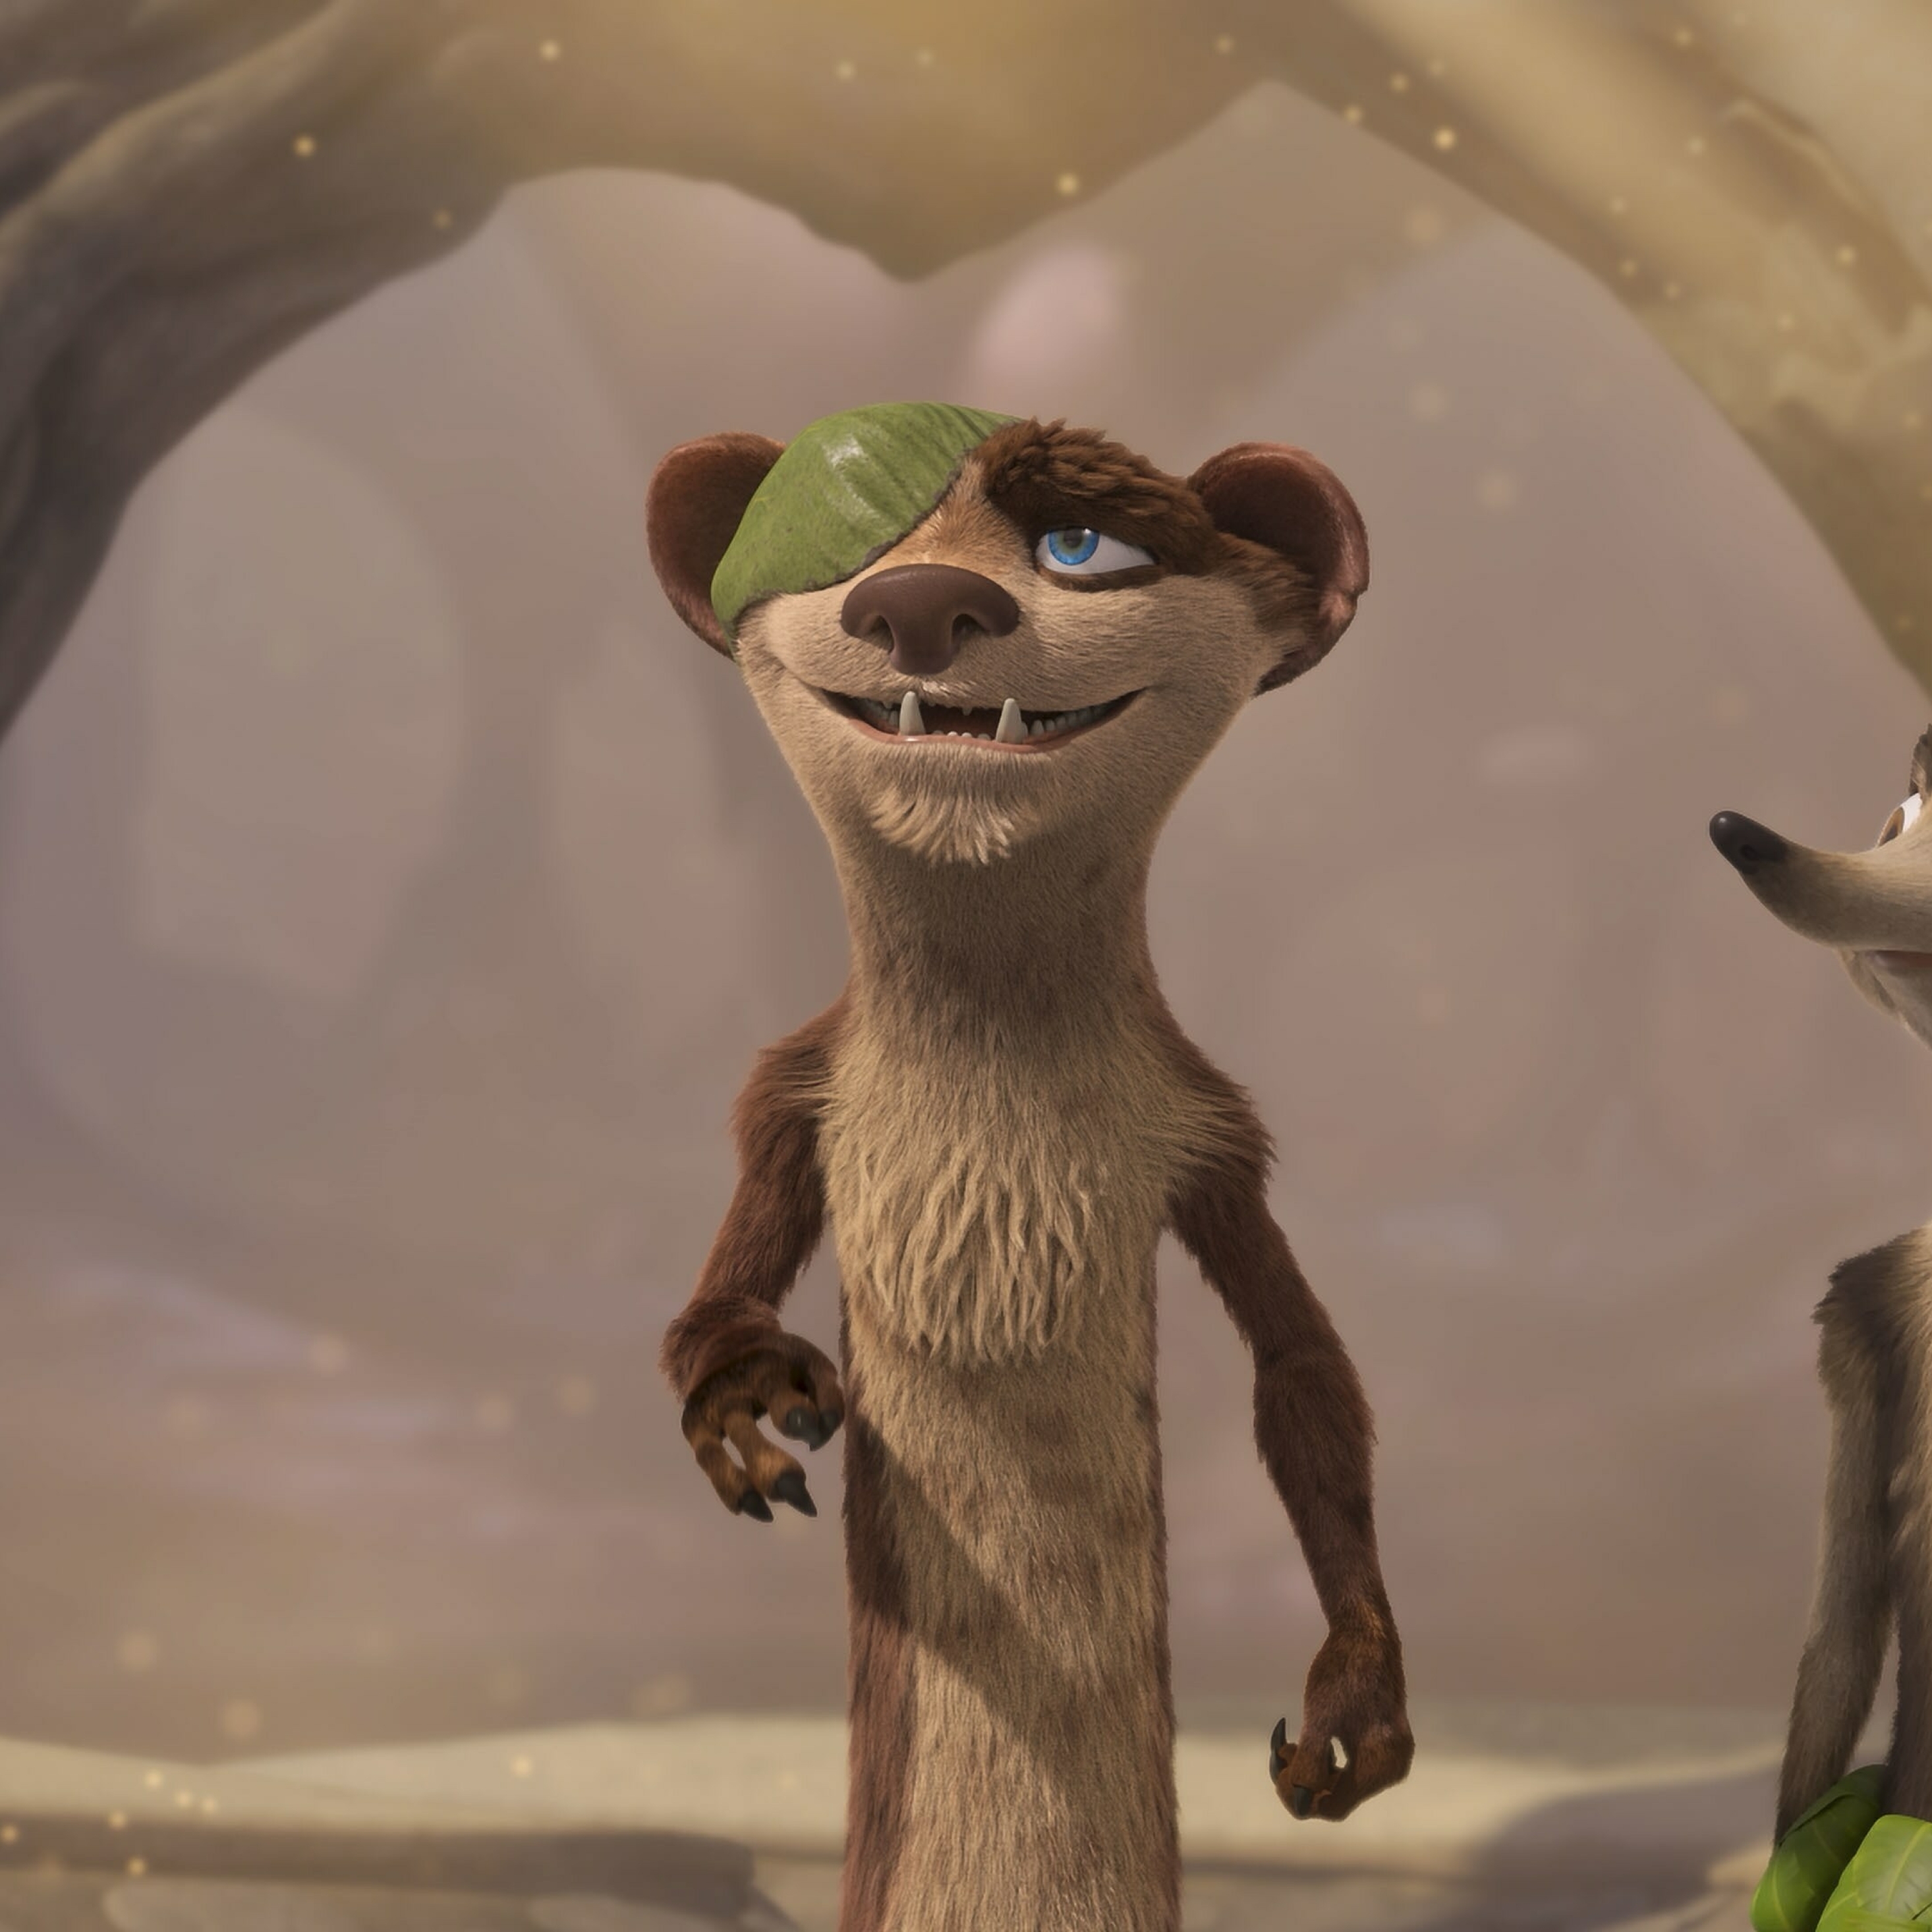 Ice age ferret with eye patch